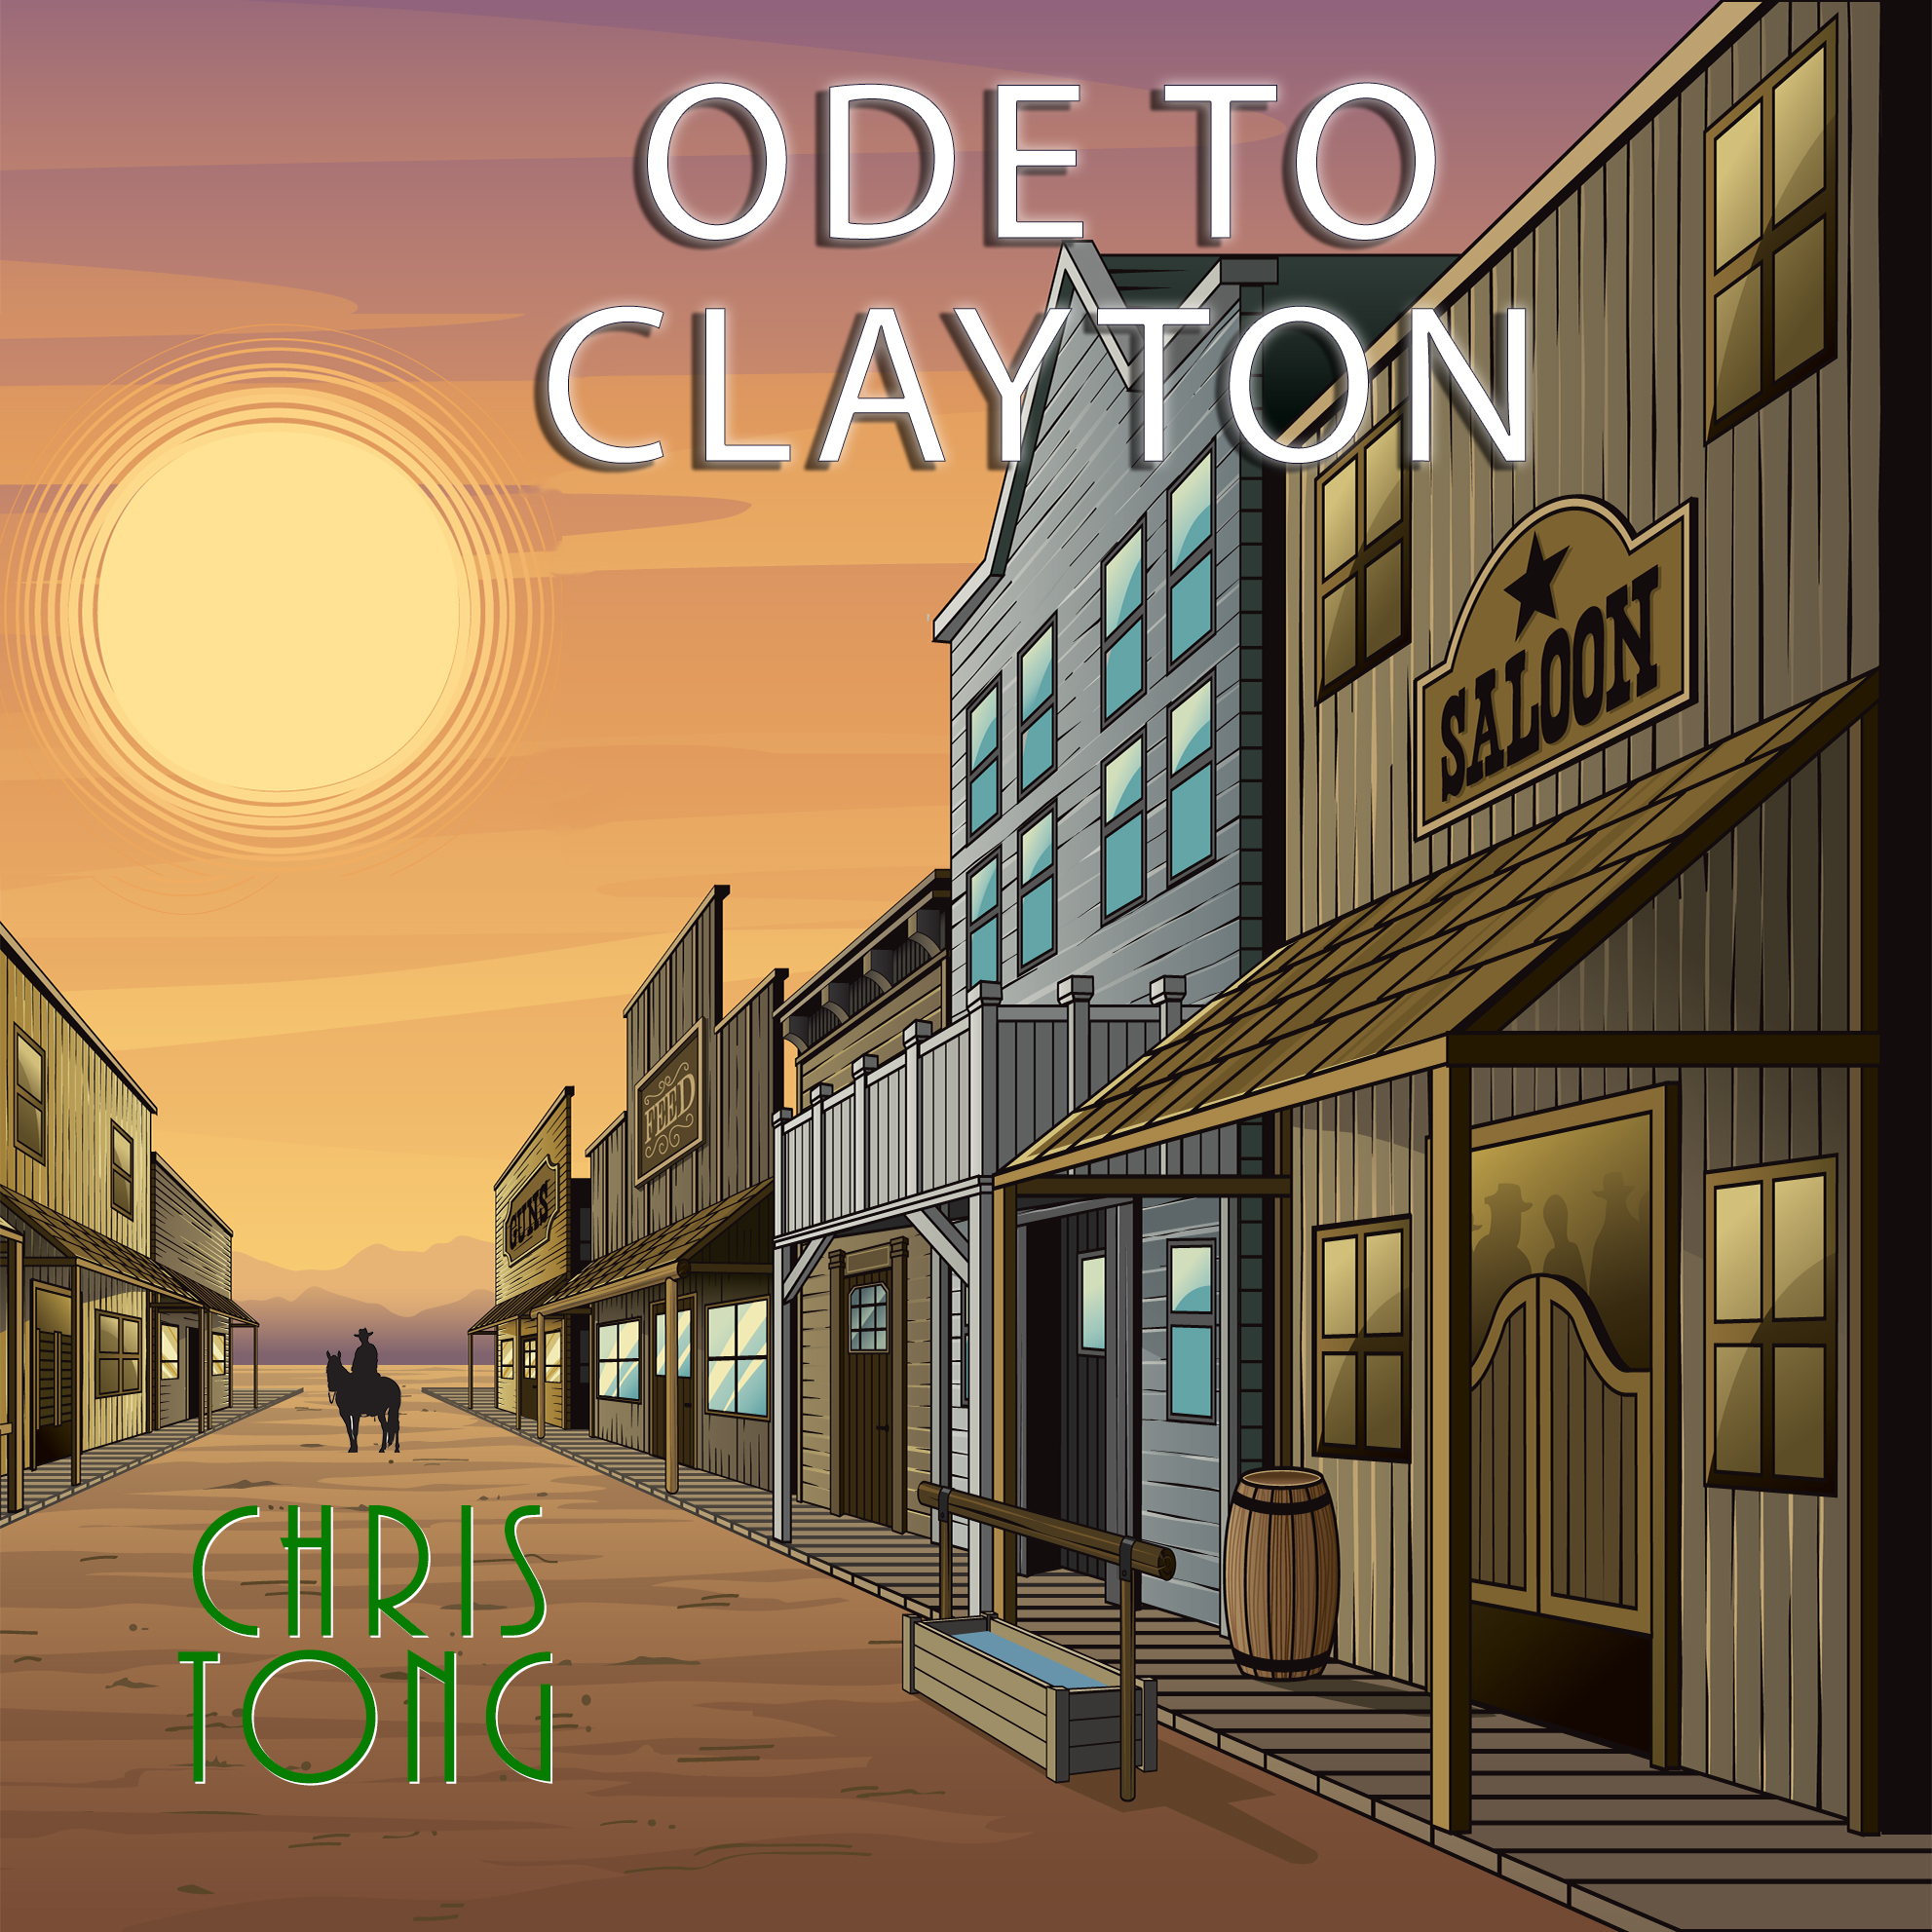 Ode To Clayton